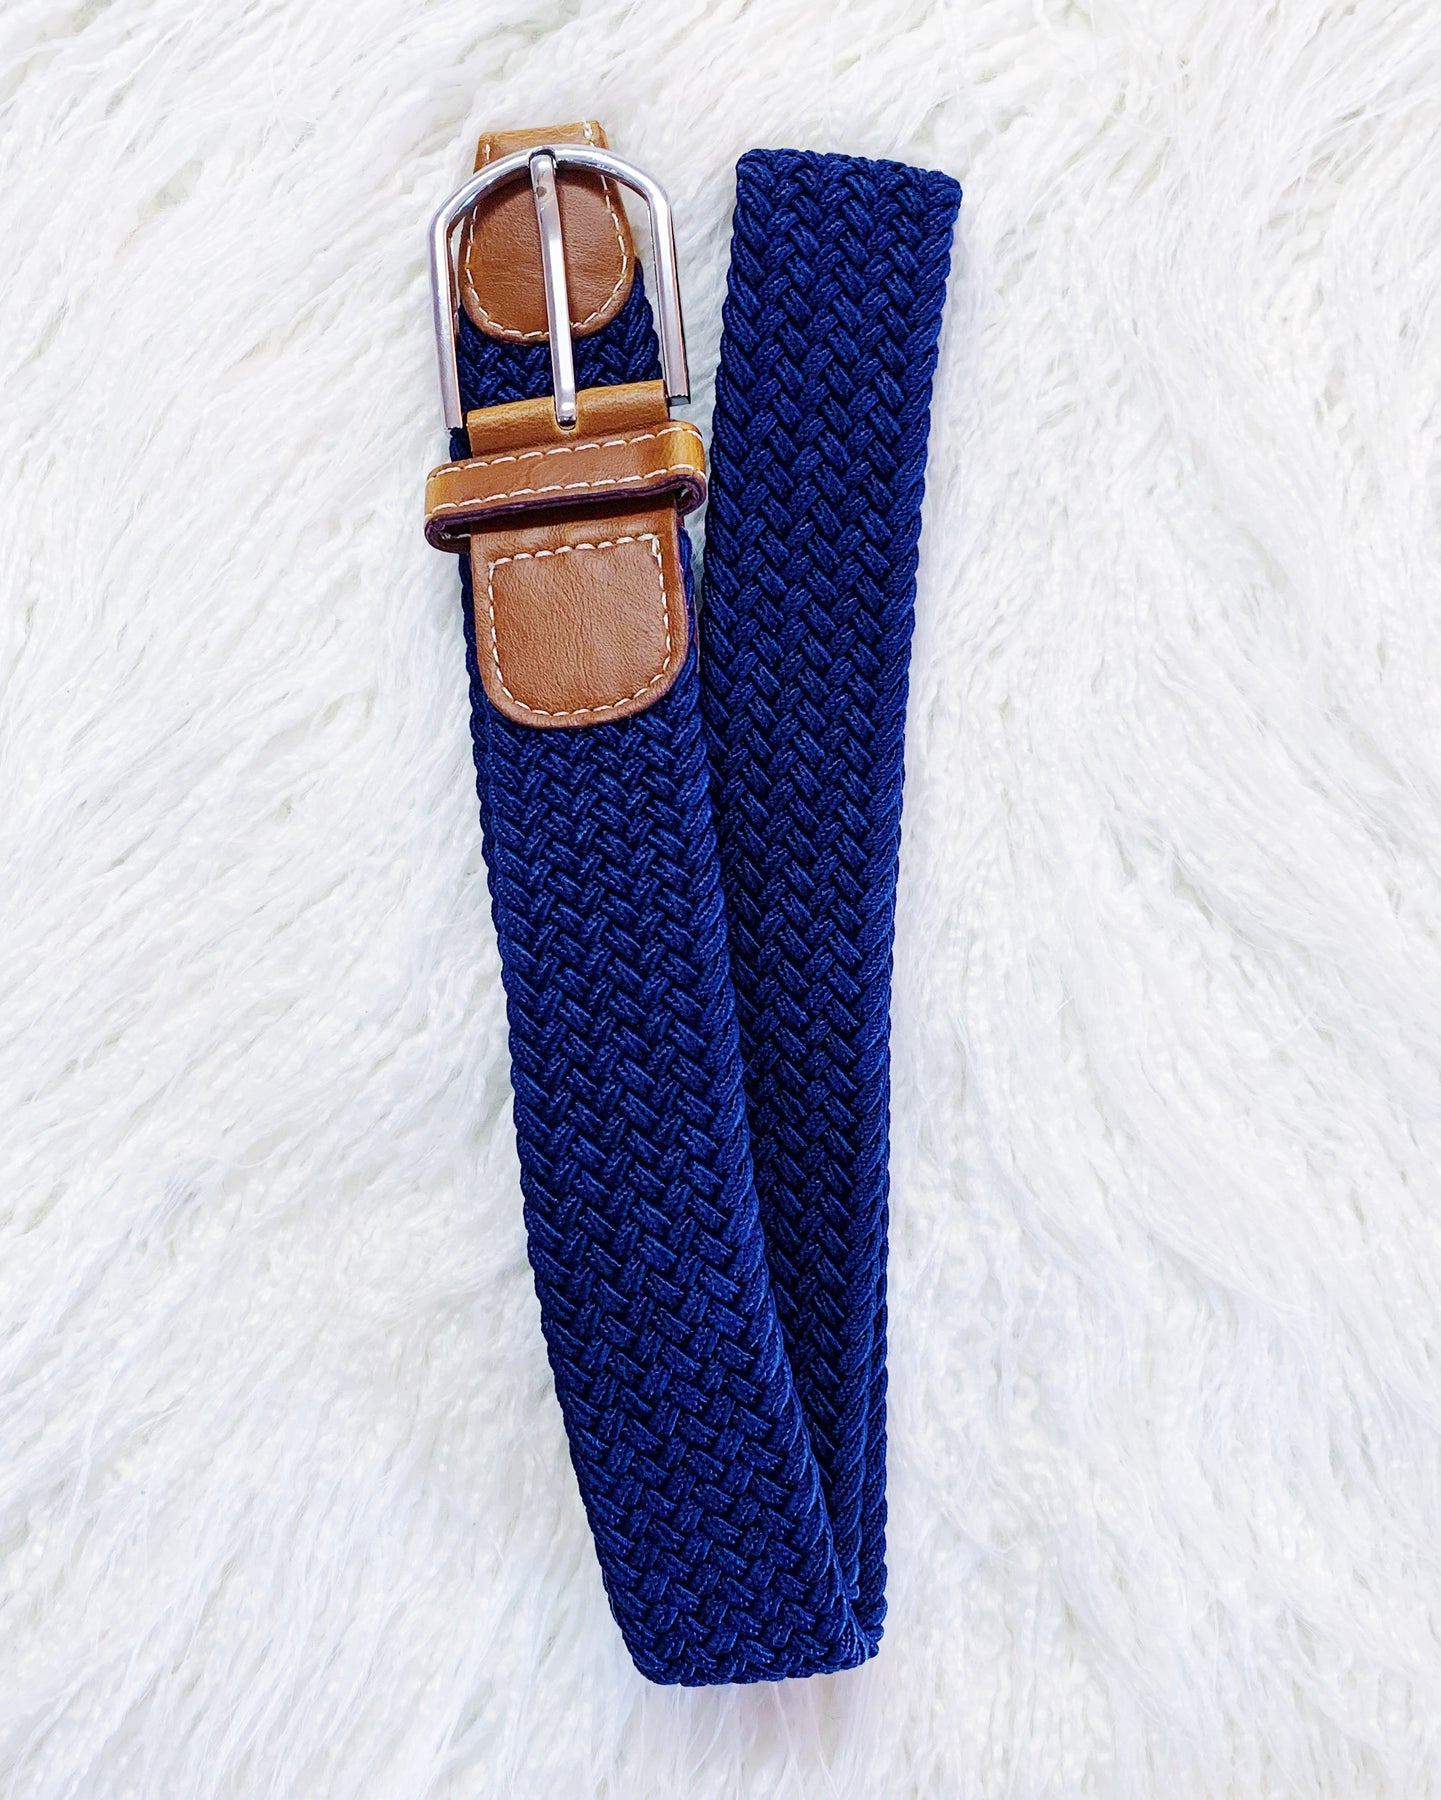 Urban For - Belts Horsewear Riders Stretch